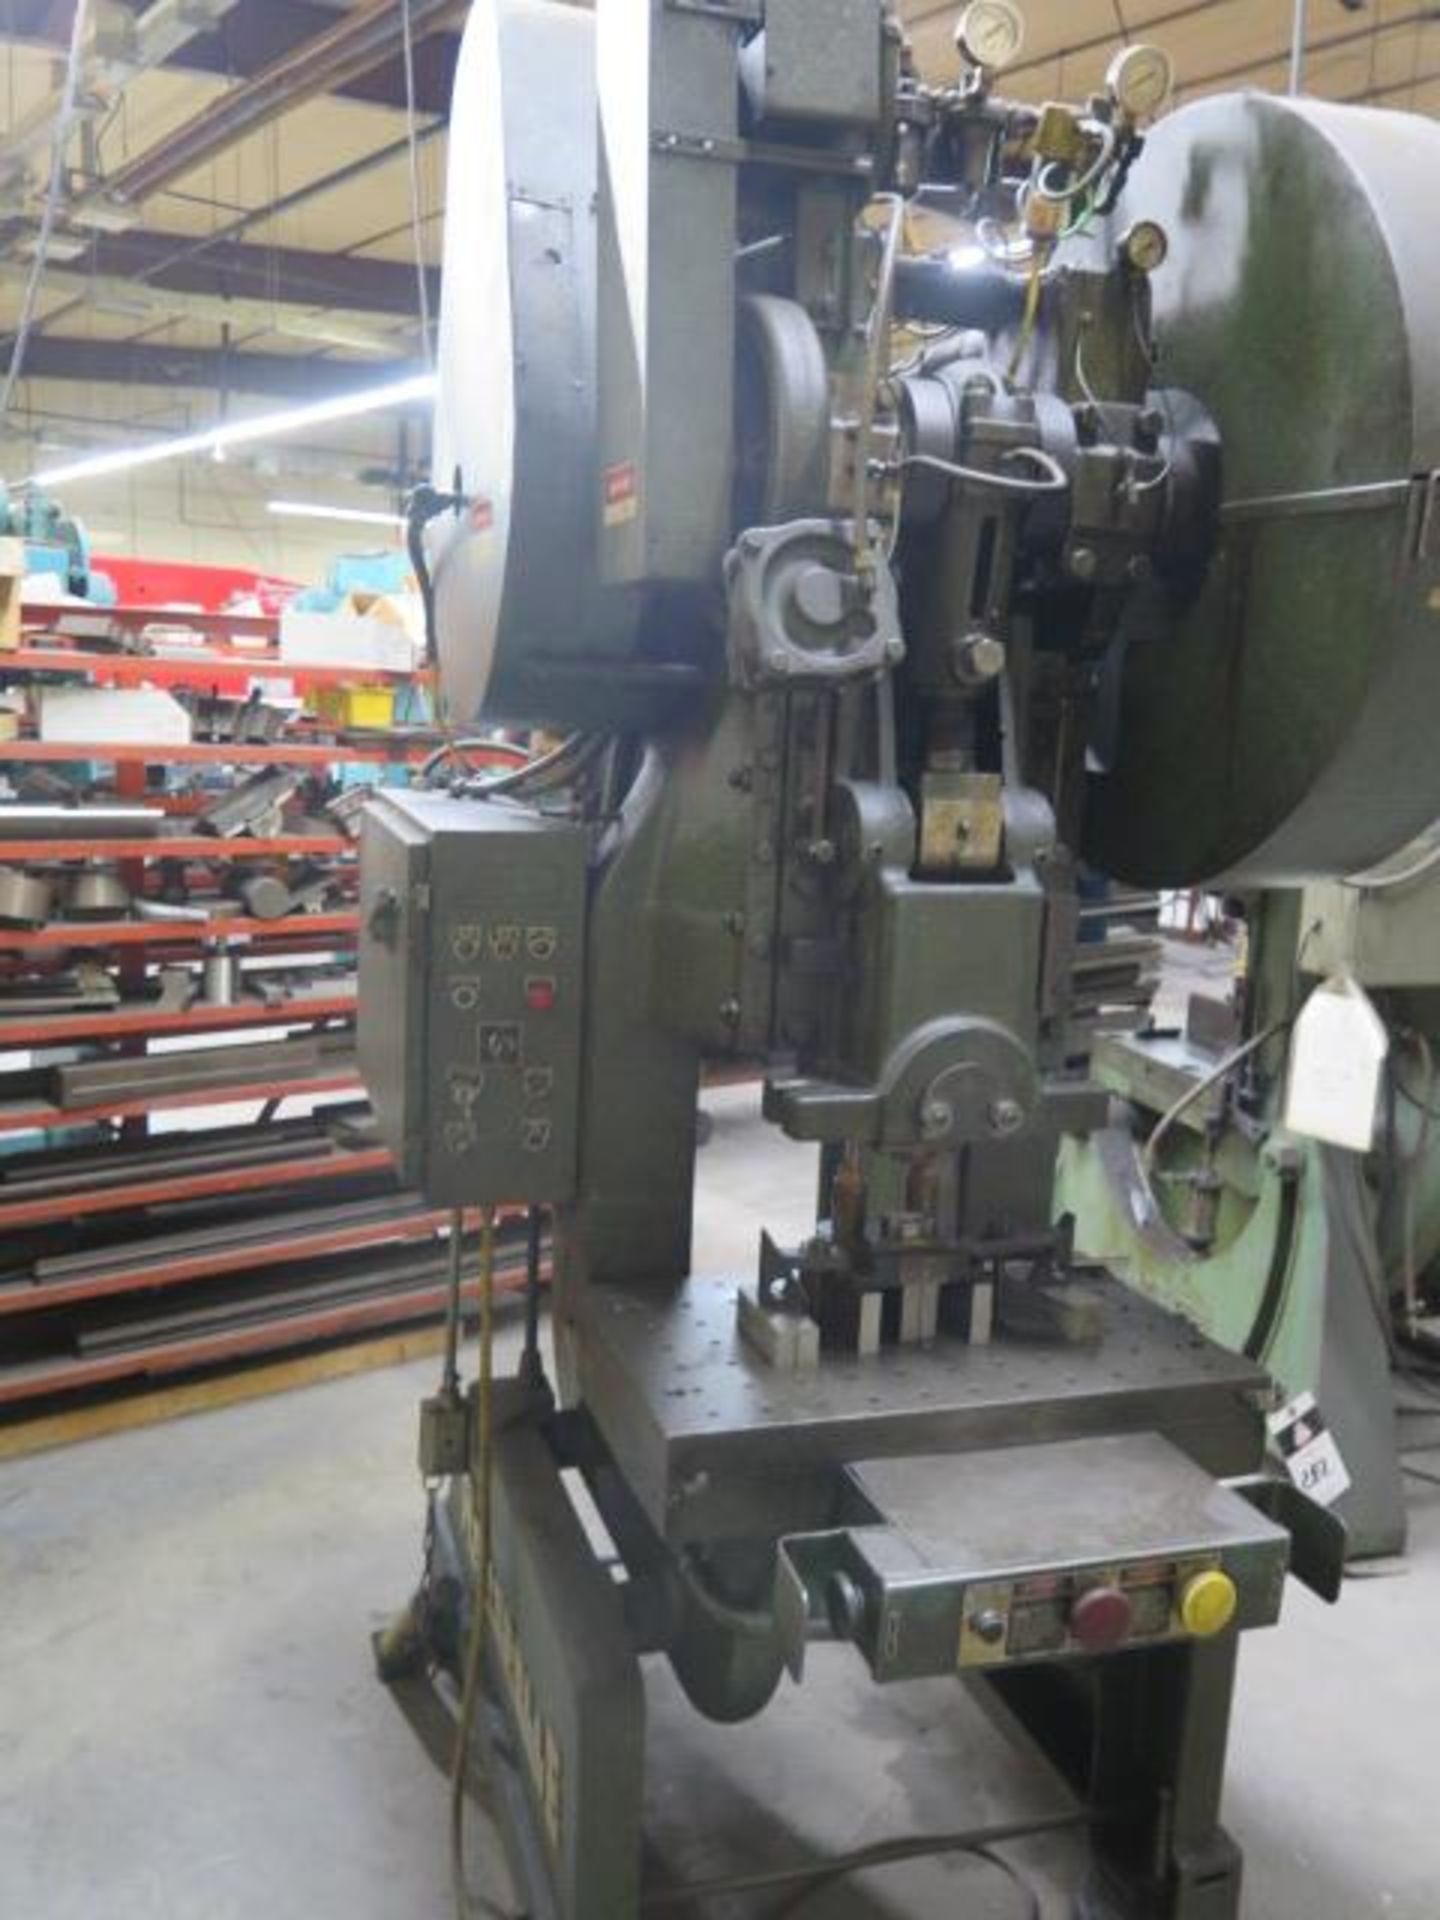 Rousselle No. 6A 60 Ton OBI Stamping Press SOLD AS PARTS ONLY, SOLD AS IS - NO WARRANTY - Image 3 of 11